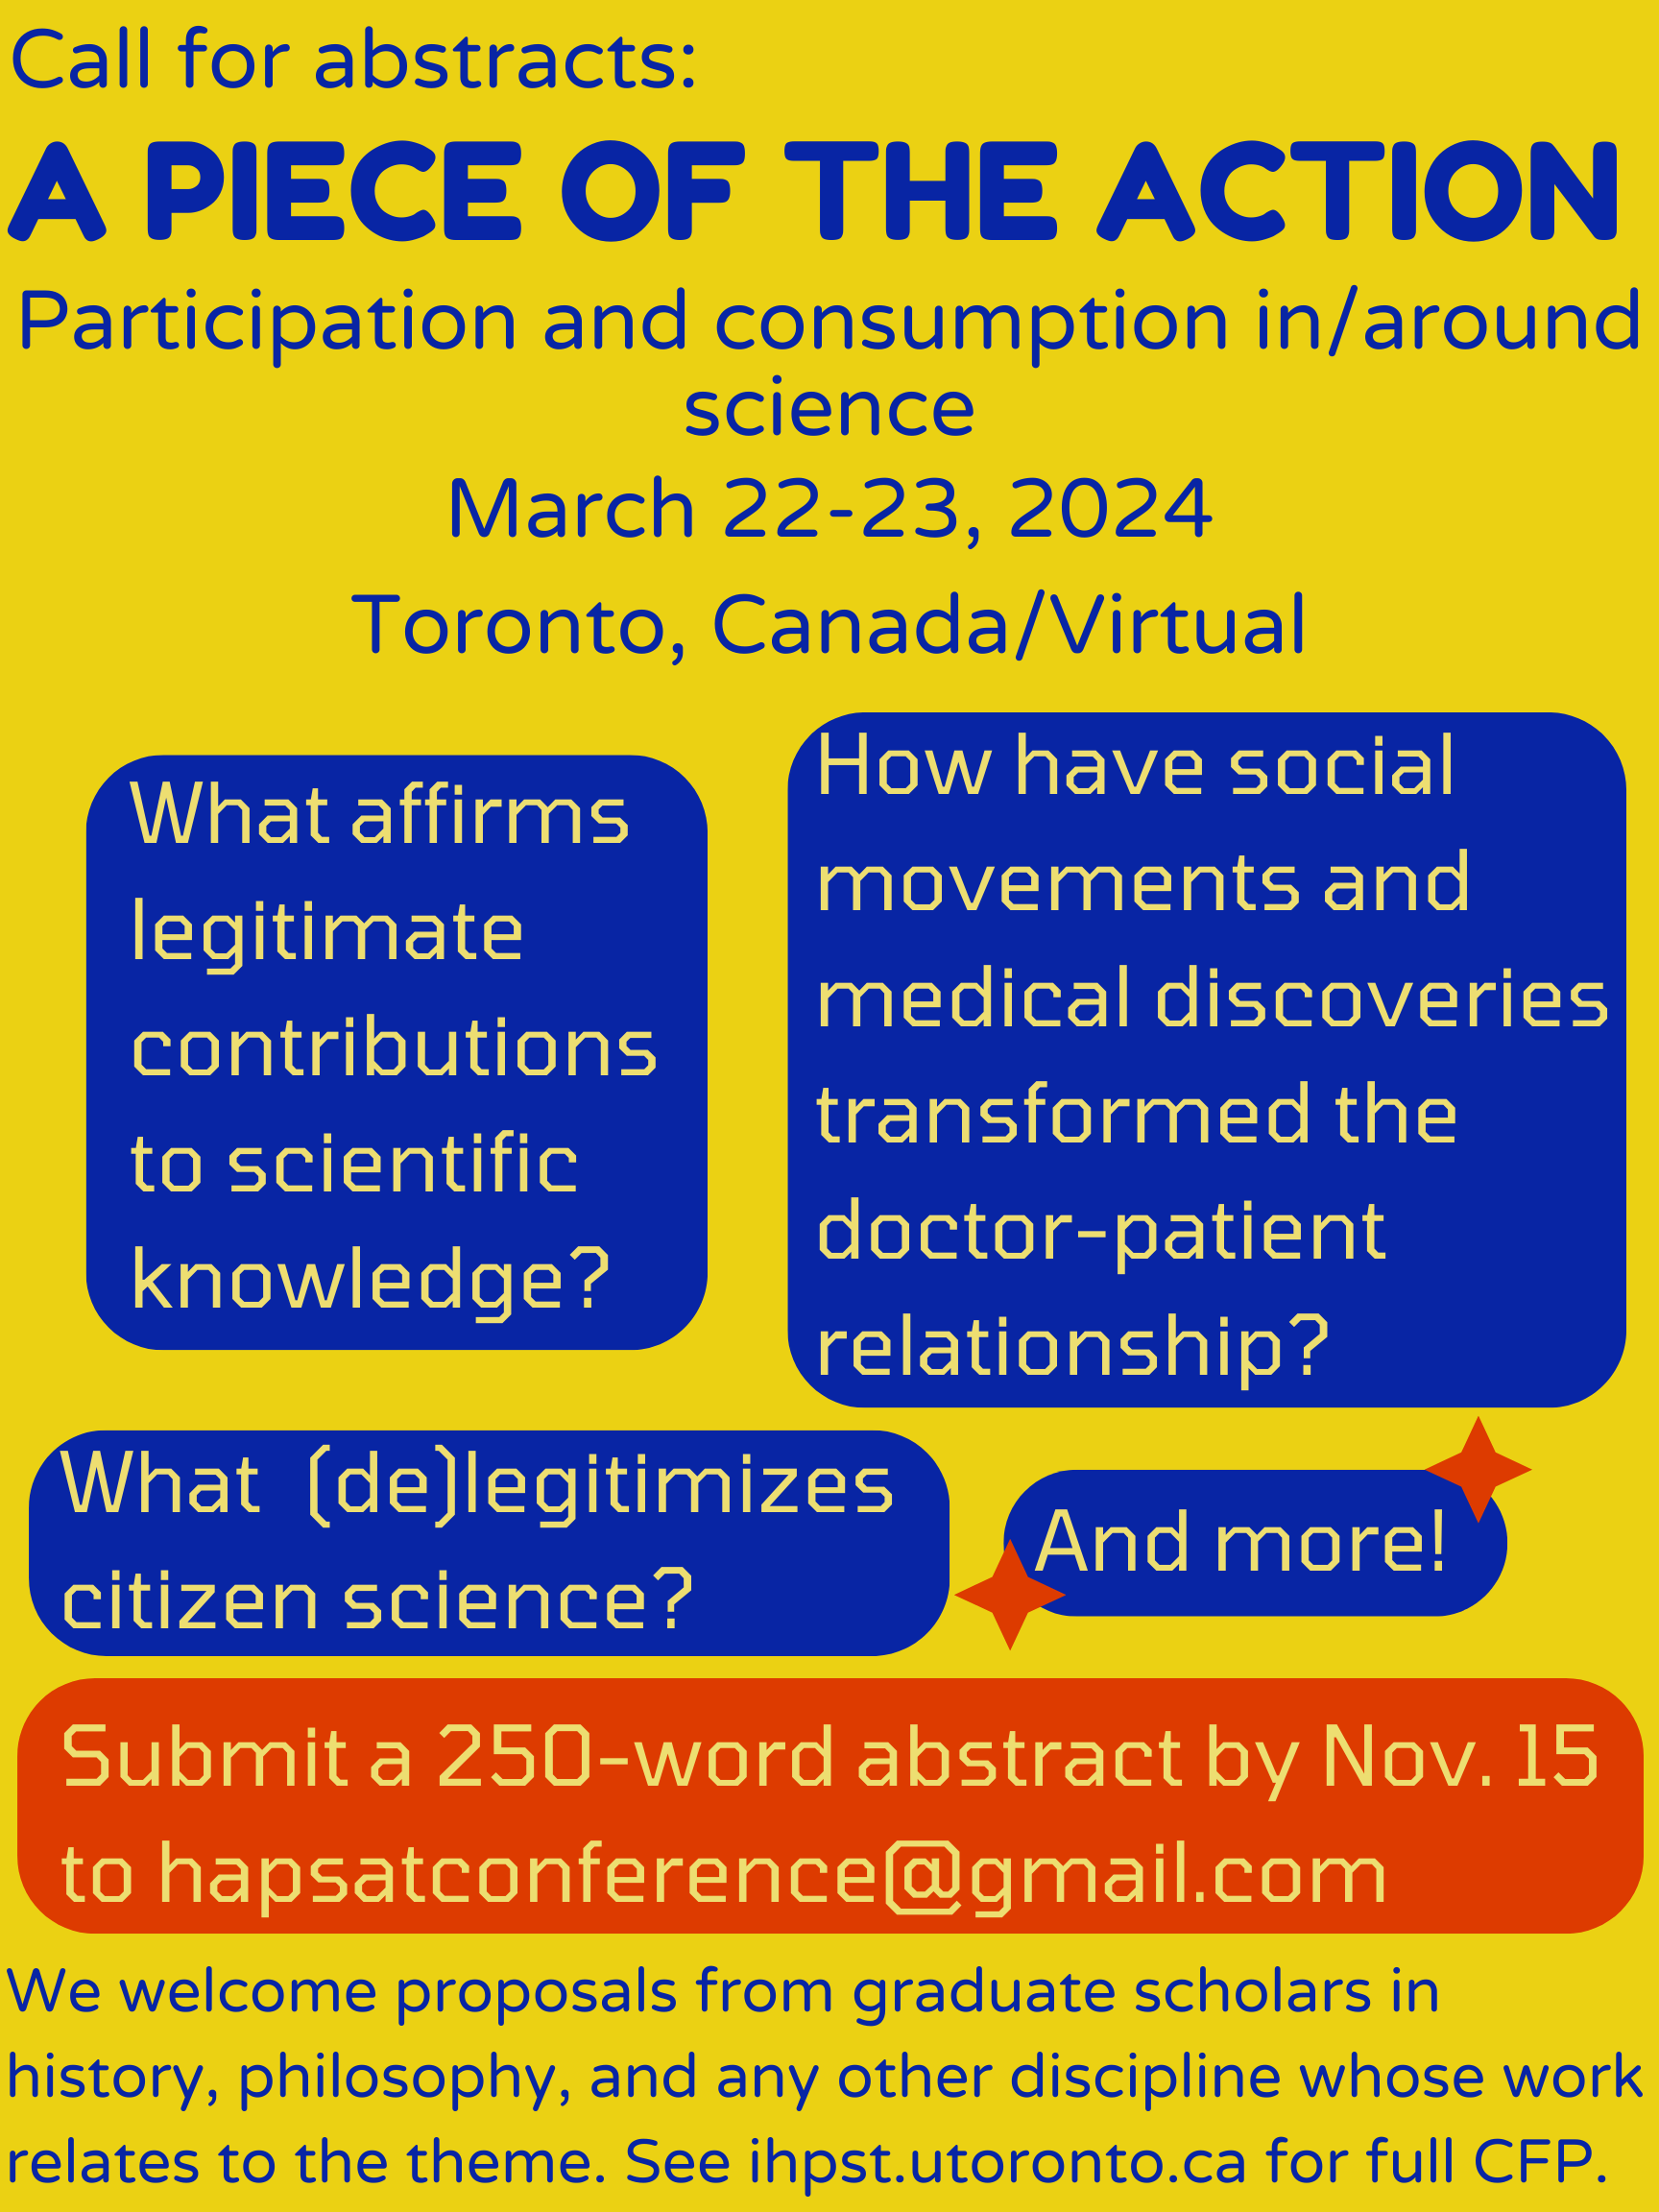 Poster Call for Abstracts in yellow, blue and orange